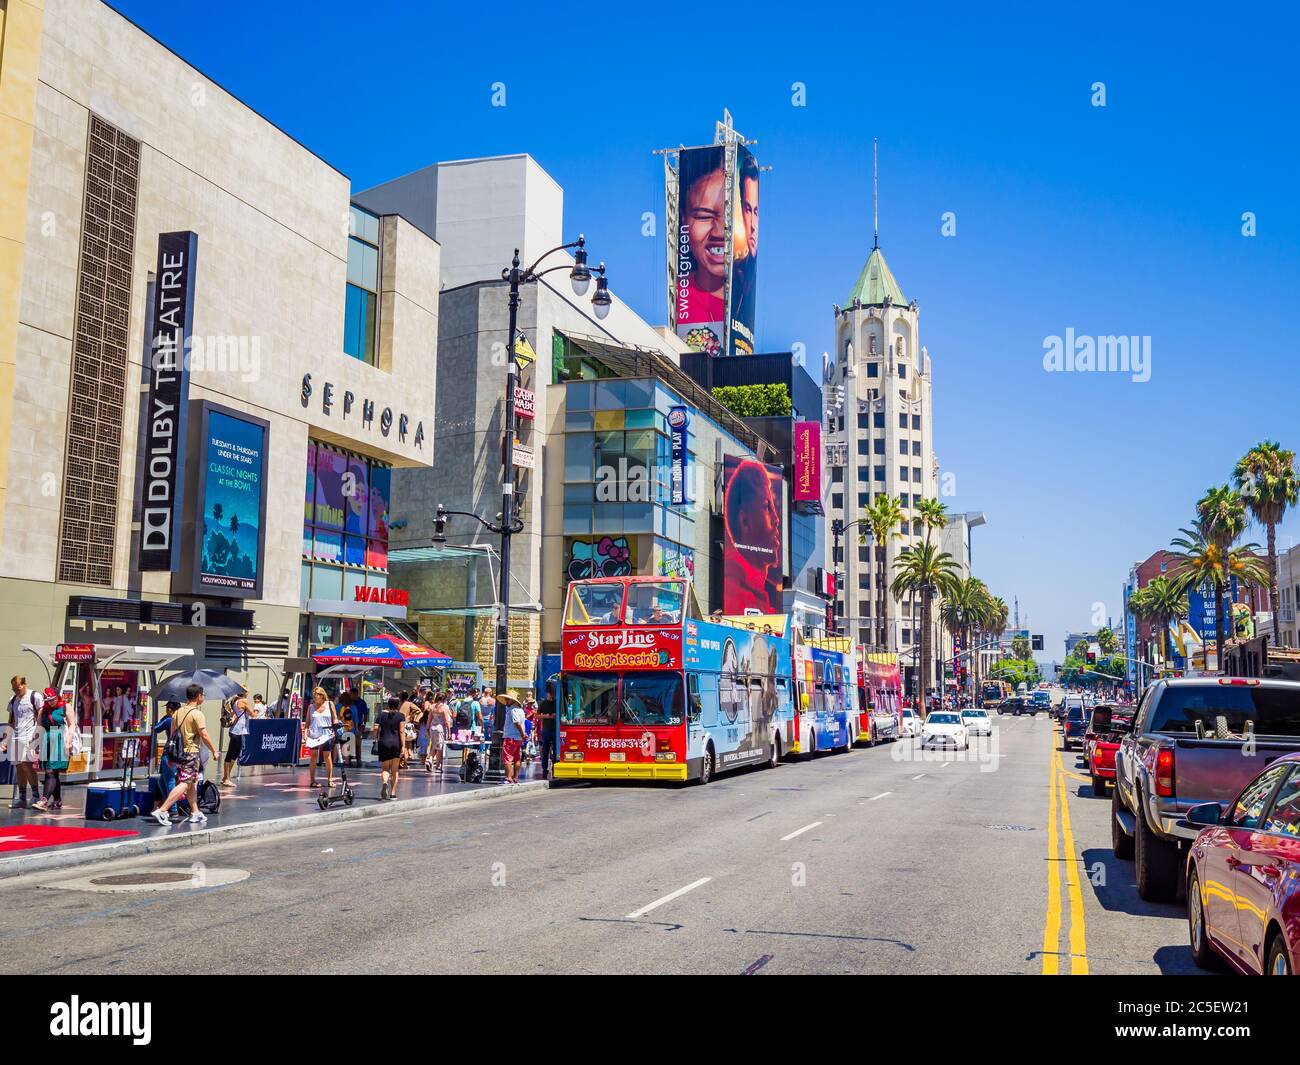 Los Angeles, California: Hollywood Boulevard and Walk of Fame. Stock Photo